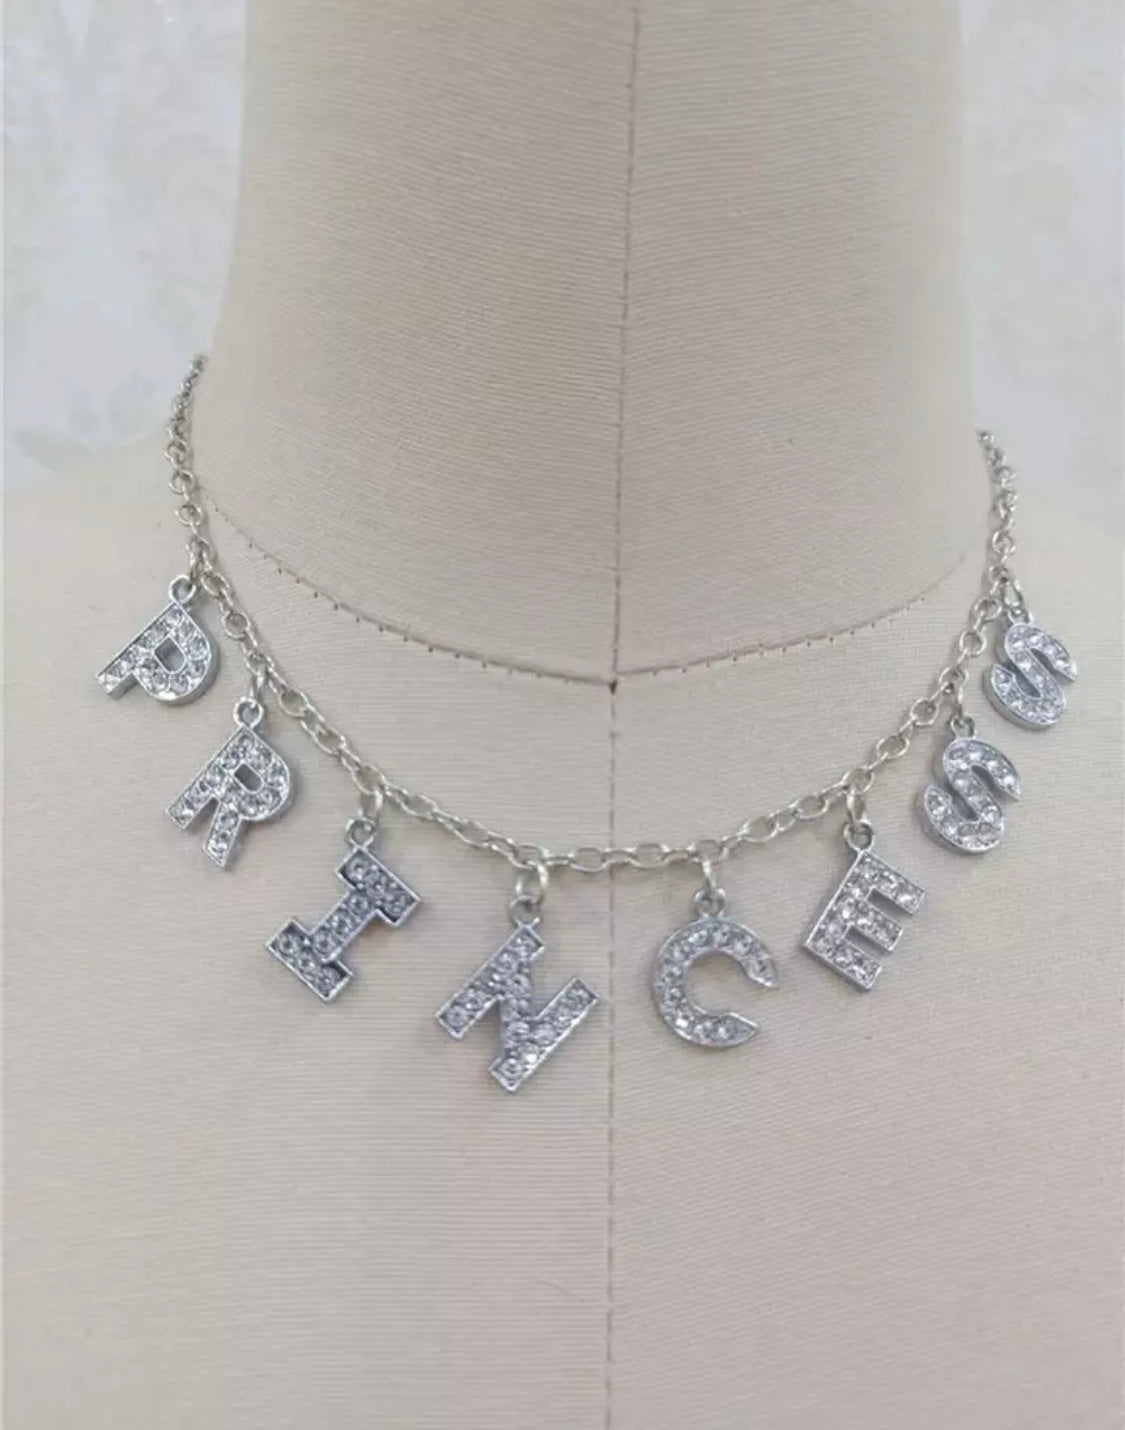 DDLGVERSE Princess Silver Plated Necklace